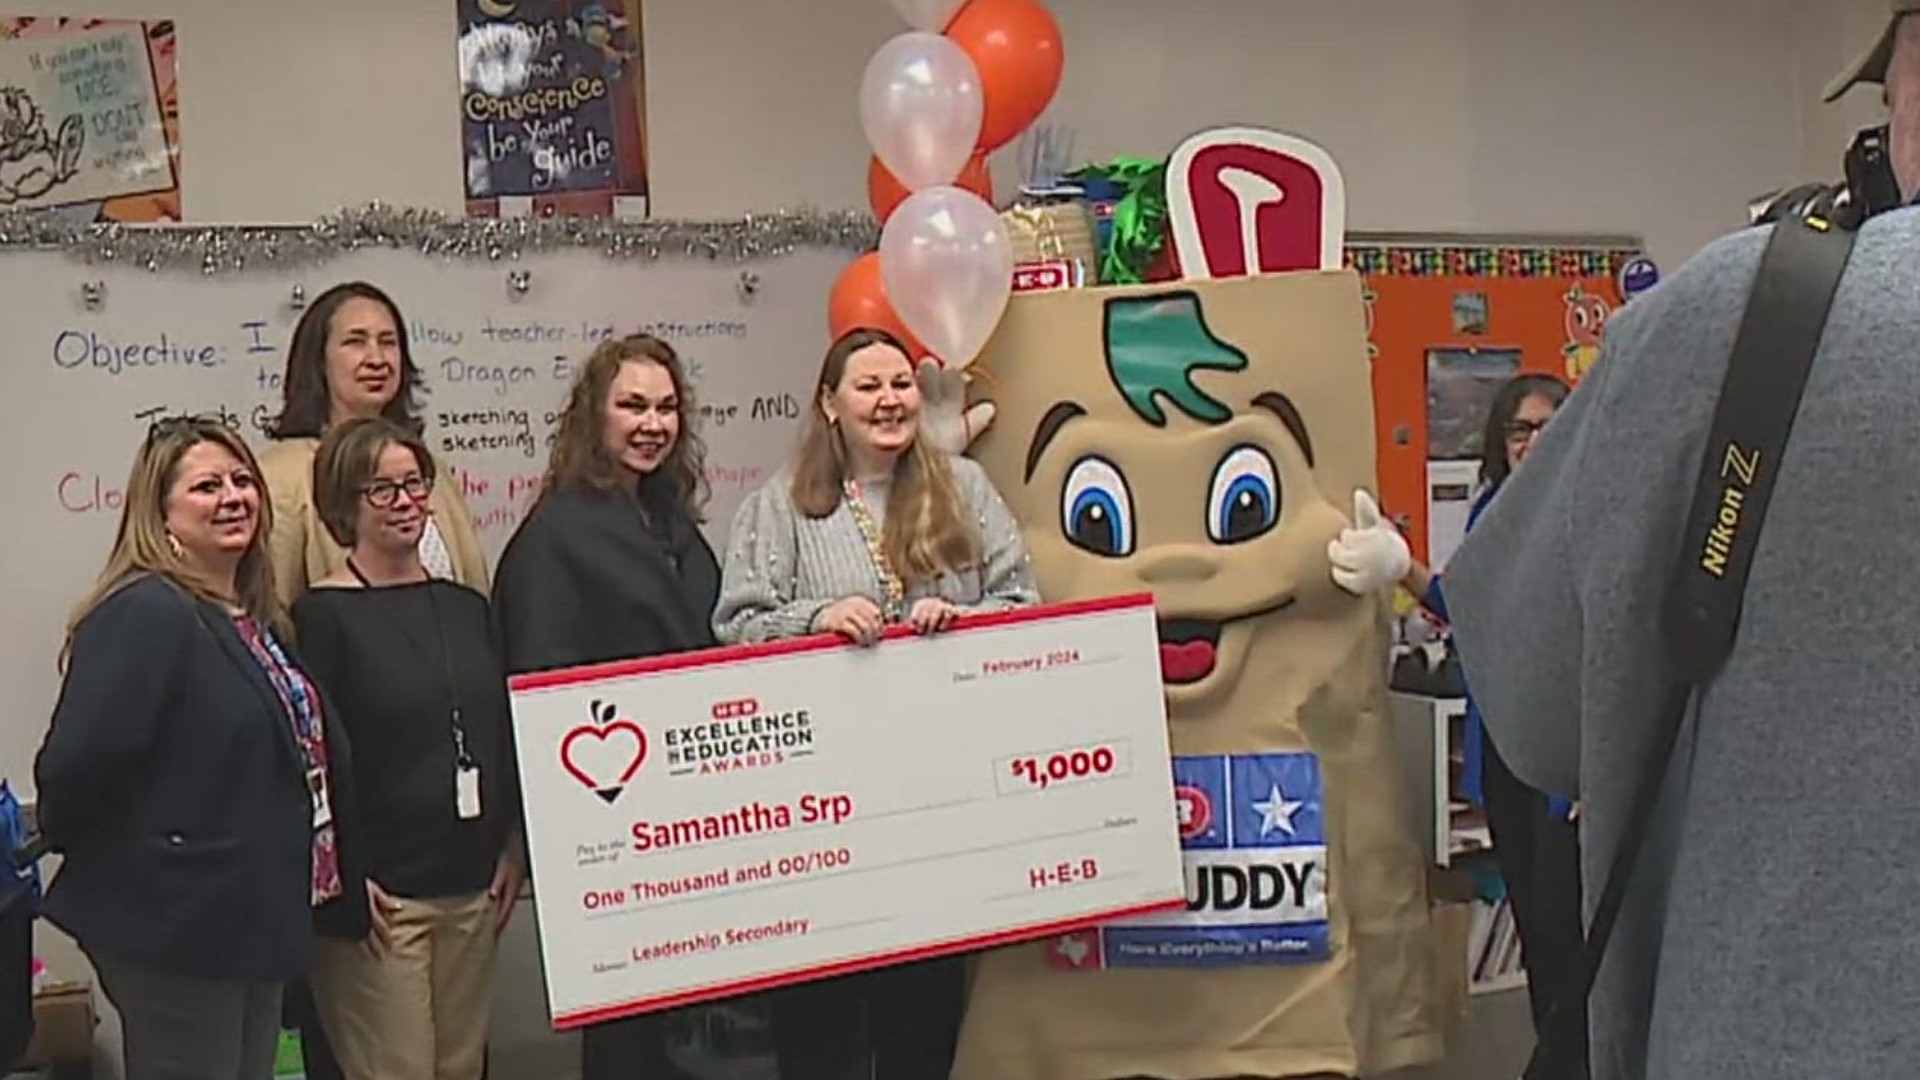 William Adams Middle School 7th grade art teacher, Samantha Srp, was named as a finalist in H-E-B's Excellence in Education Awards!